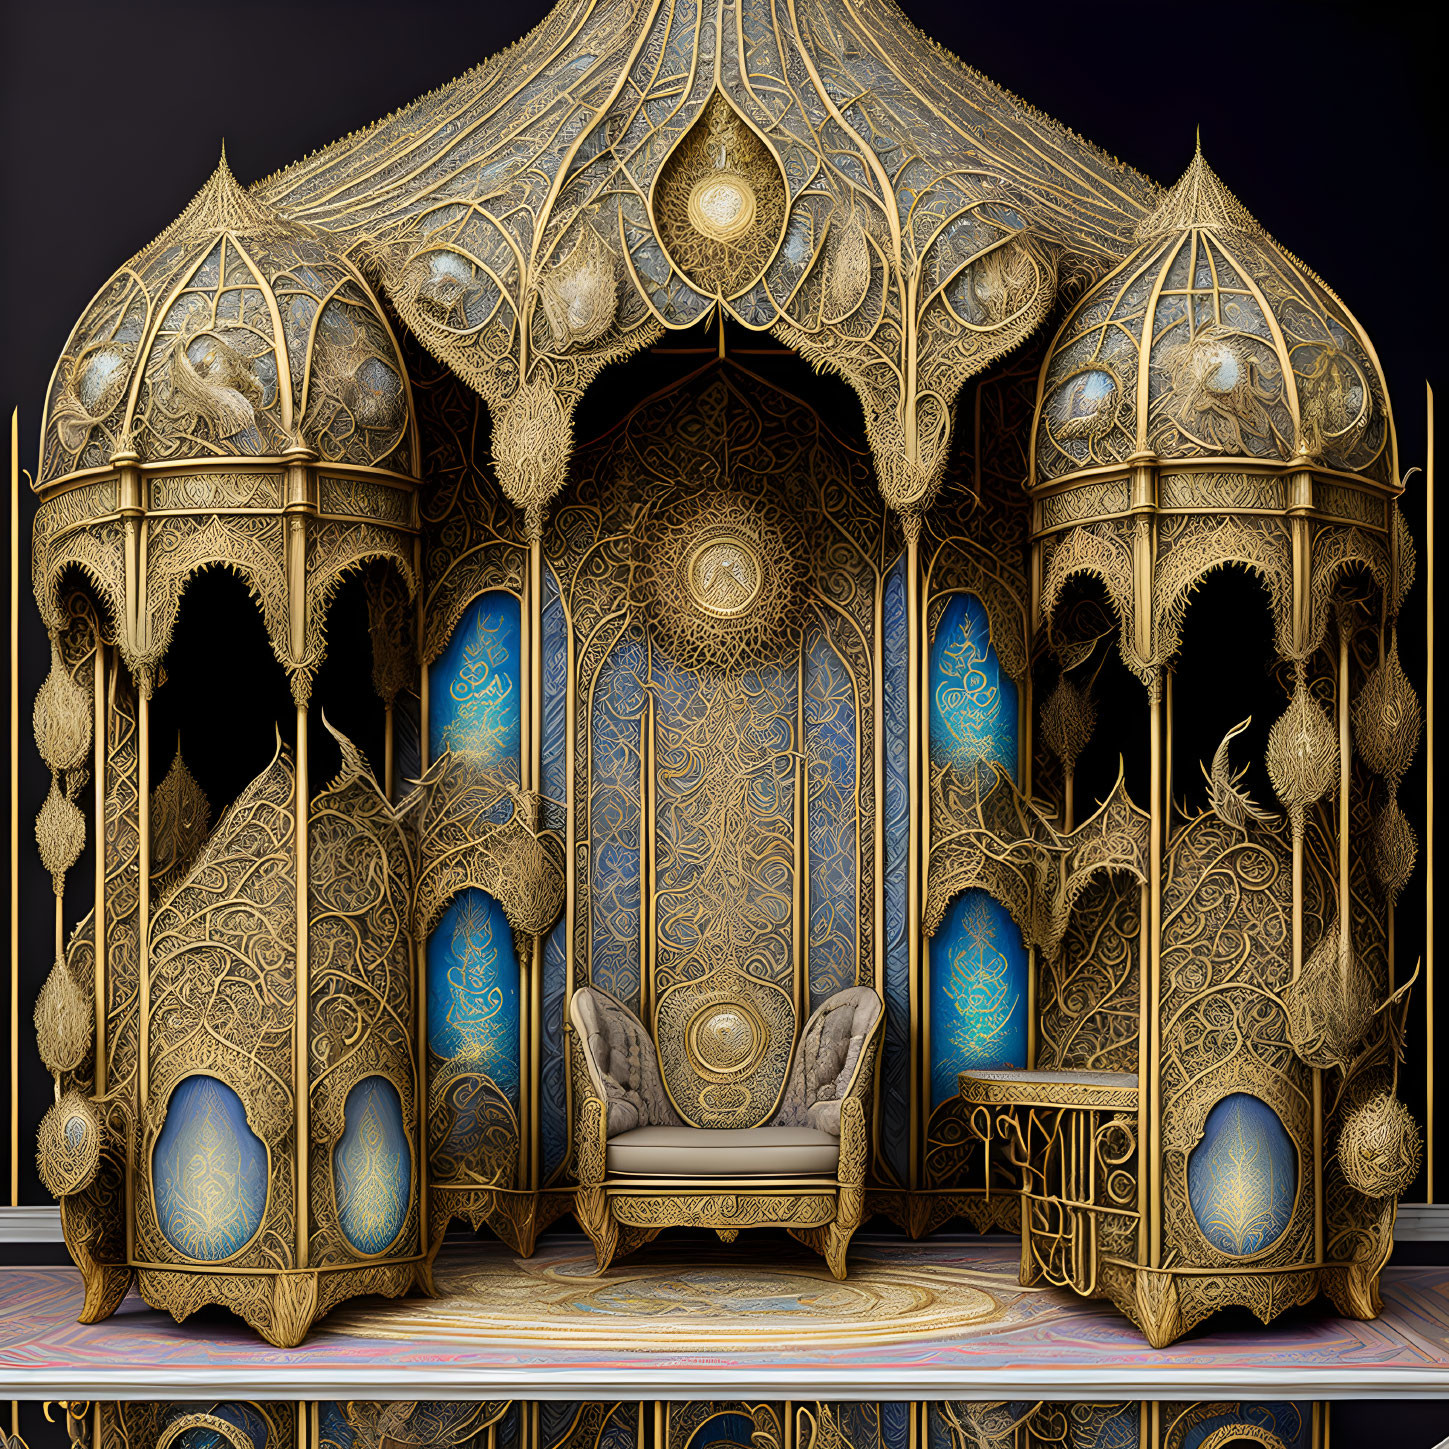 Luxurious Golden Throne Room with Blue Accents